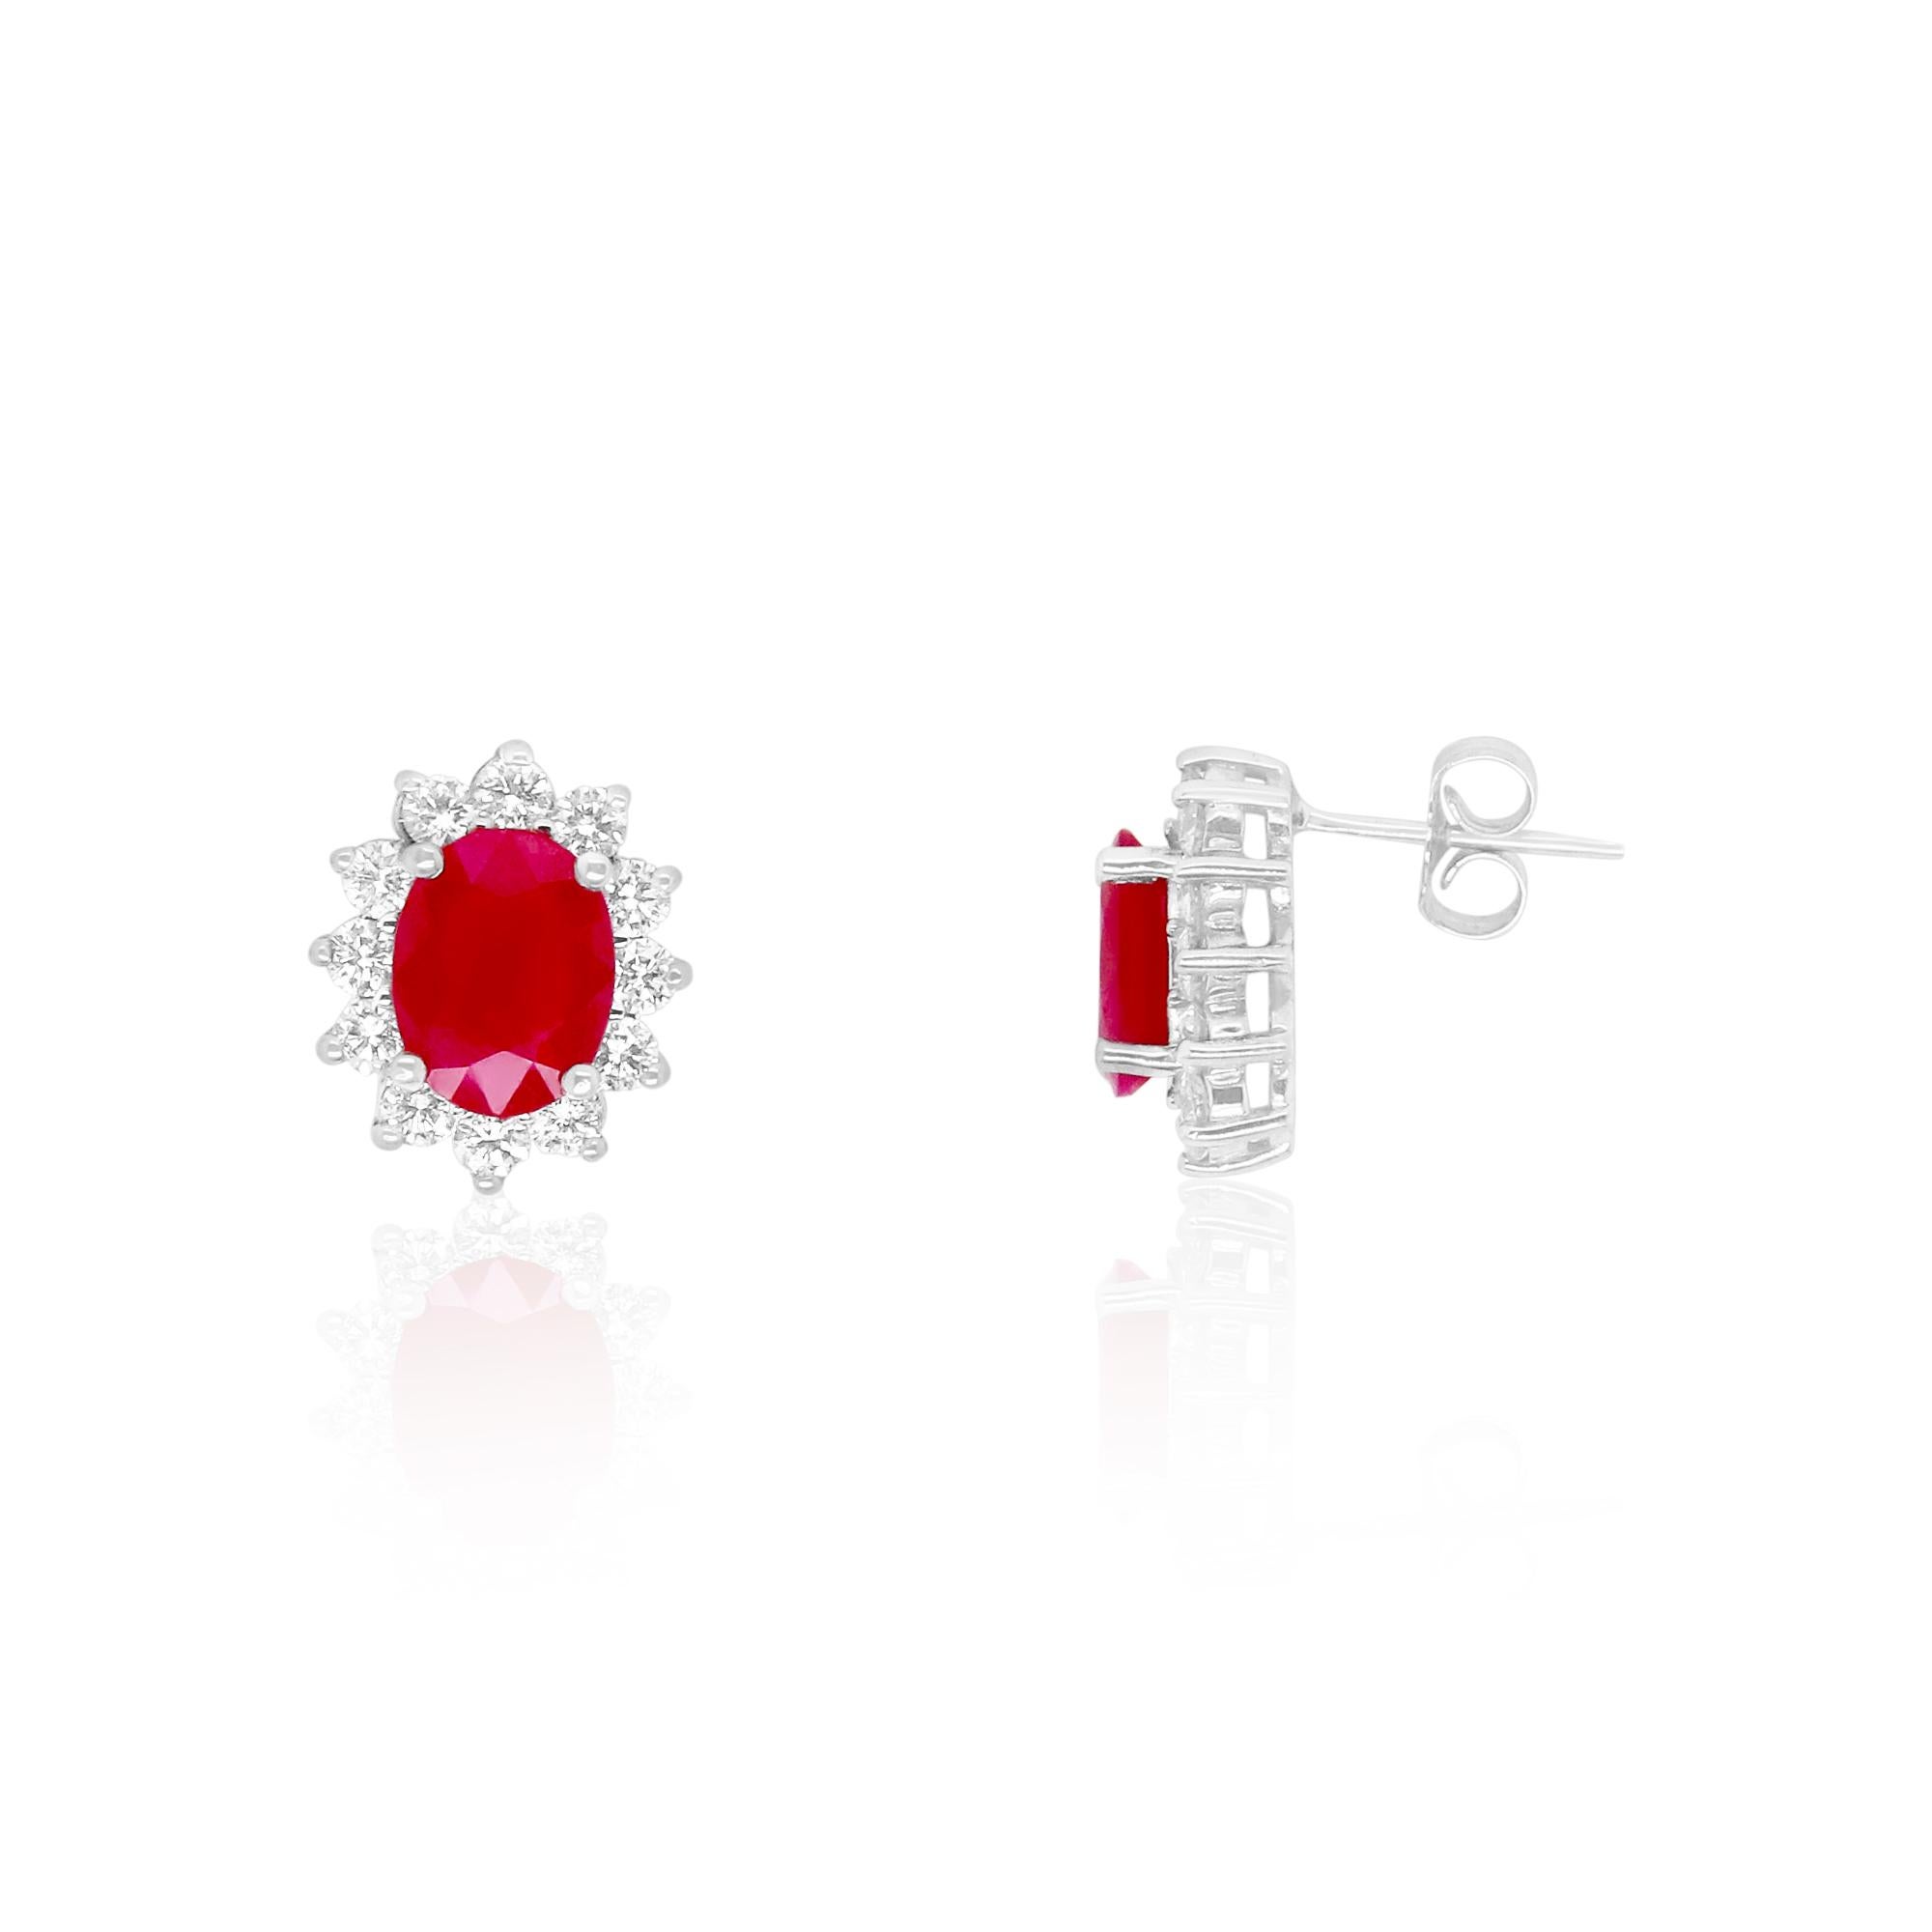 Material: 14k White Gold 
Stone Details: 2 Oval Rubies at 2.75 Carats Total - Measuring 8 x 6mm
24 Brilliant Round White Diamonds at 0.92 Carats. Clarity: SI / Color: H-I

Fine one-of-a kind craftsmanship meets incredible quality in this